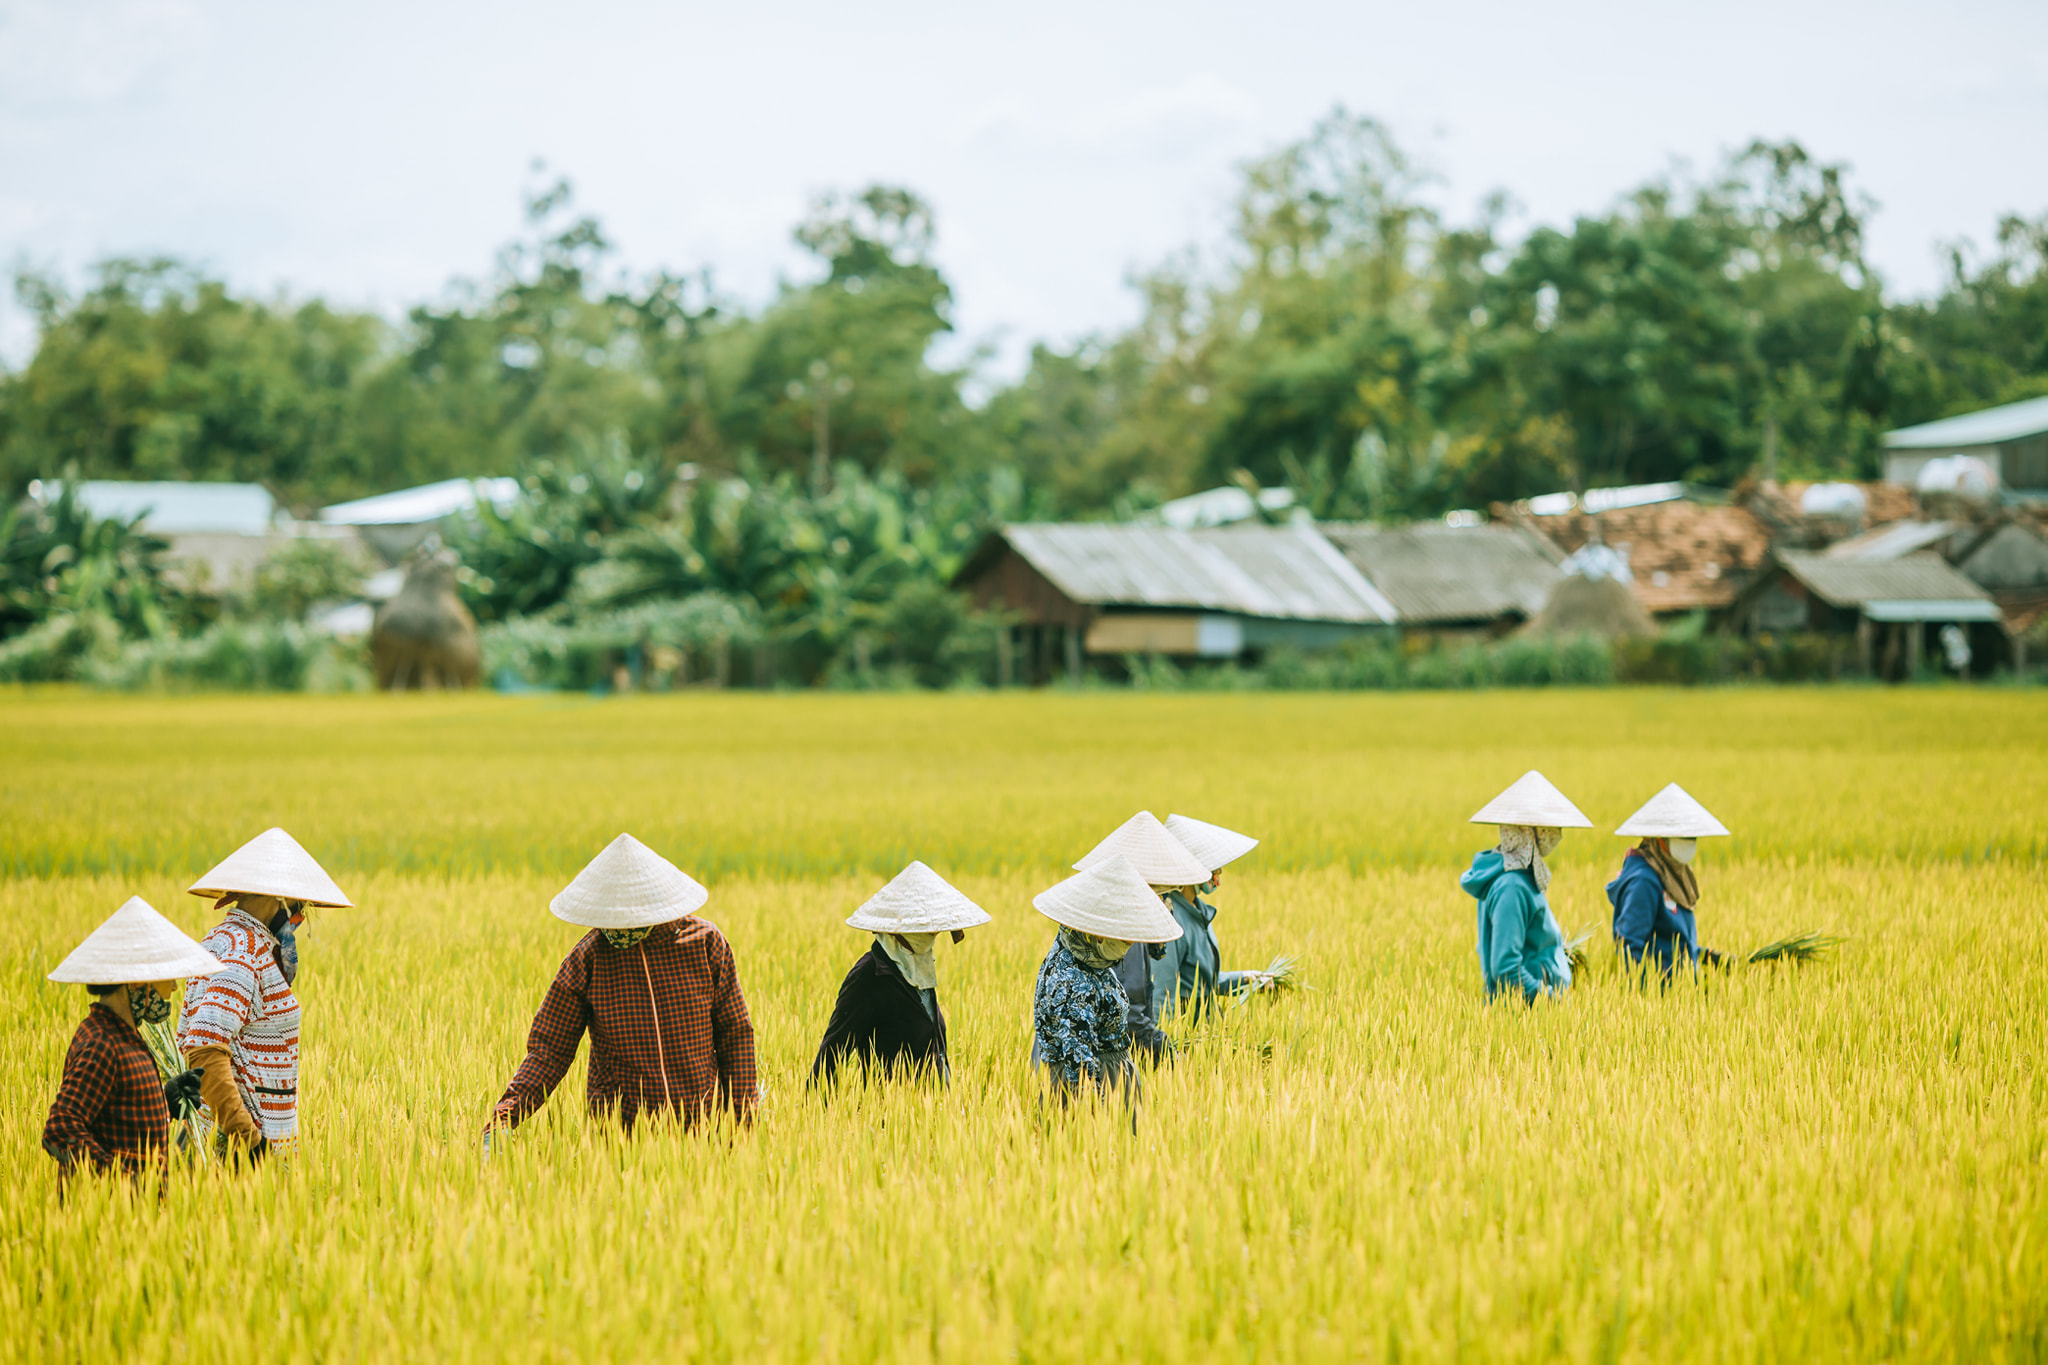 The farmers work hard on the golden rice fields.